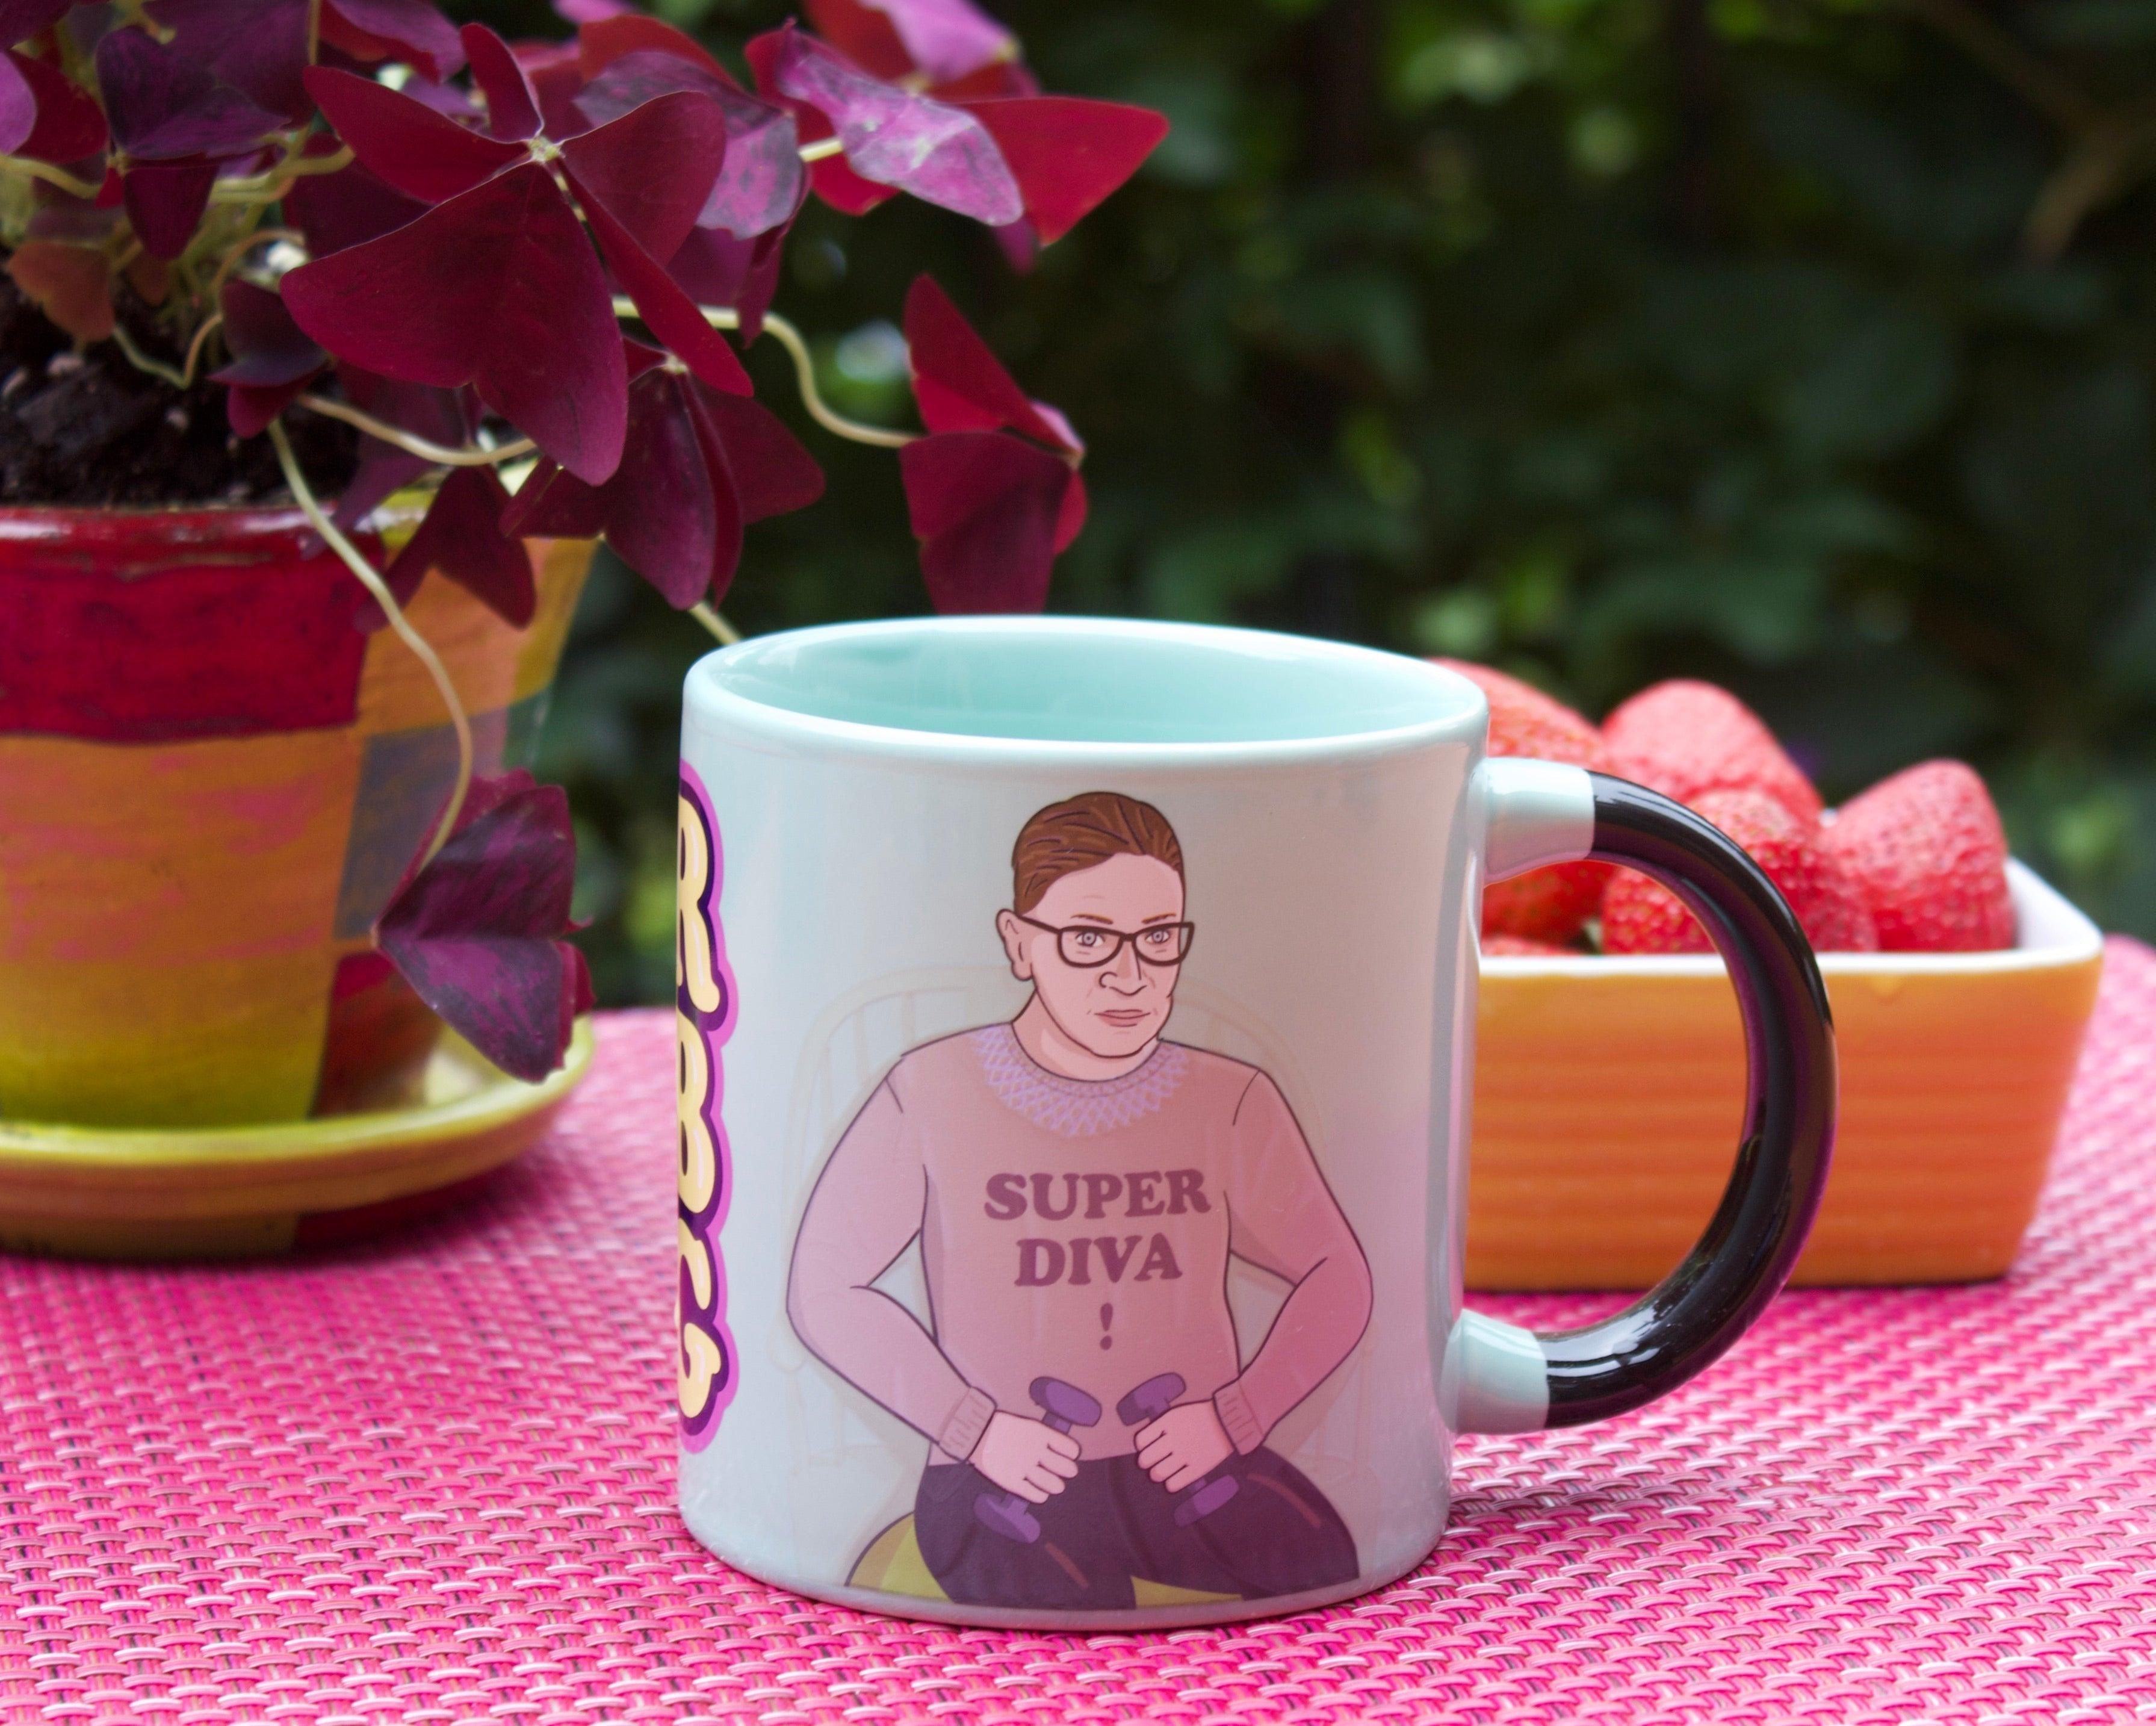 Product photo of Ruth Bader Ginsburg Heat-Changing Mug, a novelty gift manufactured by The Unemployed Philosophers Guild.